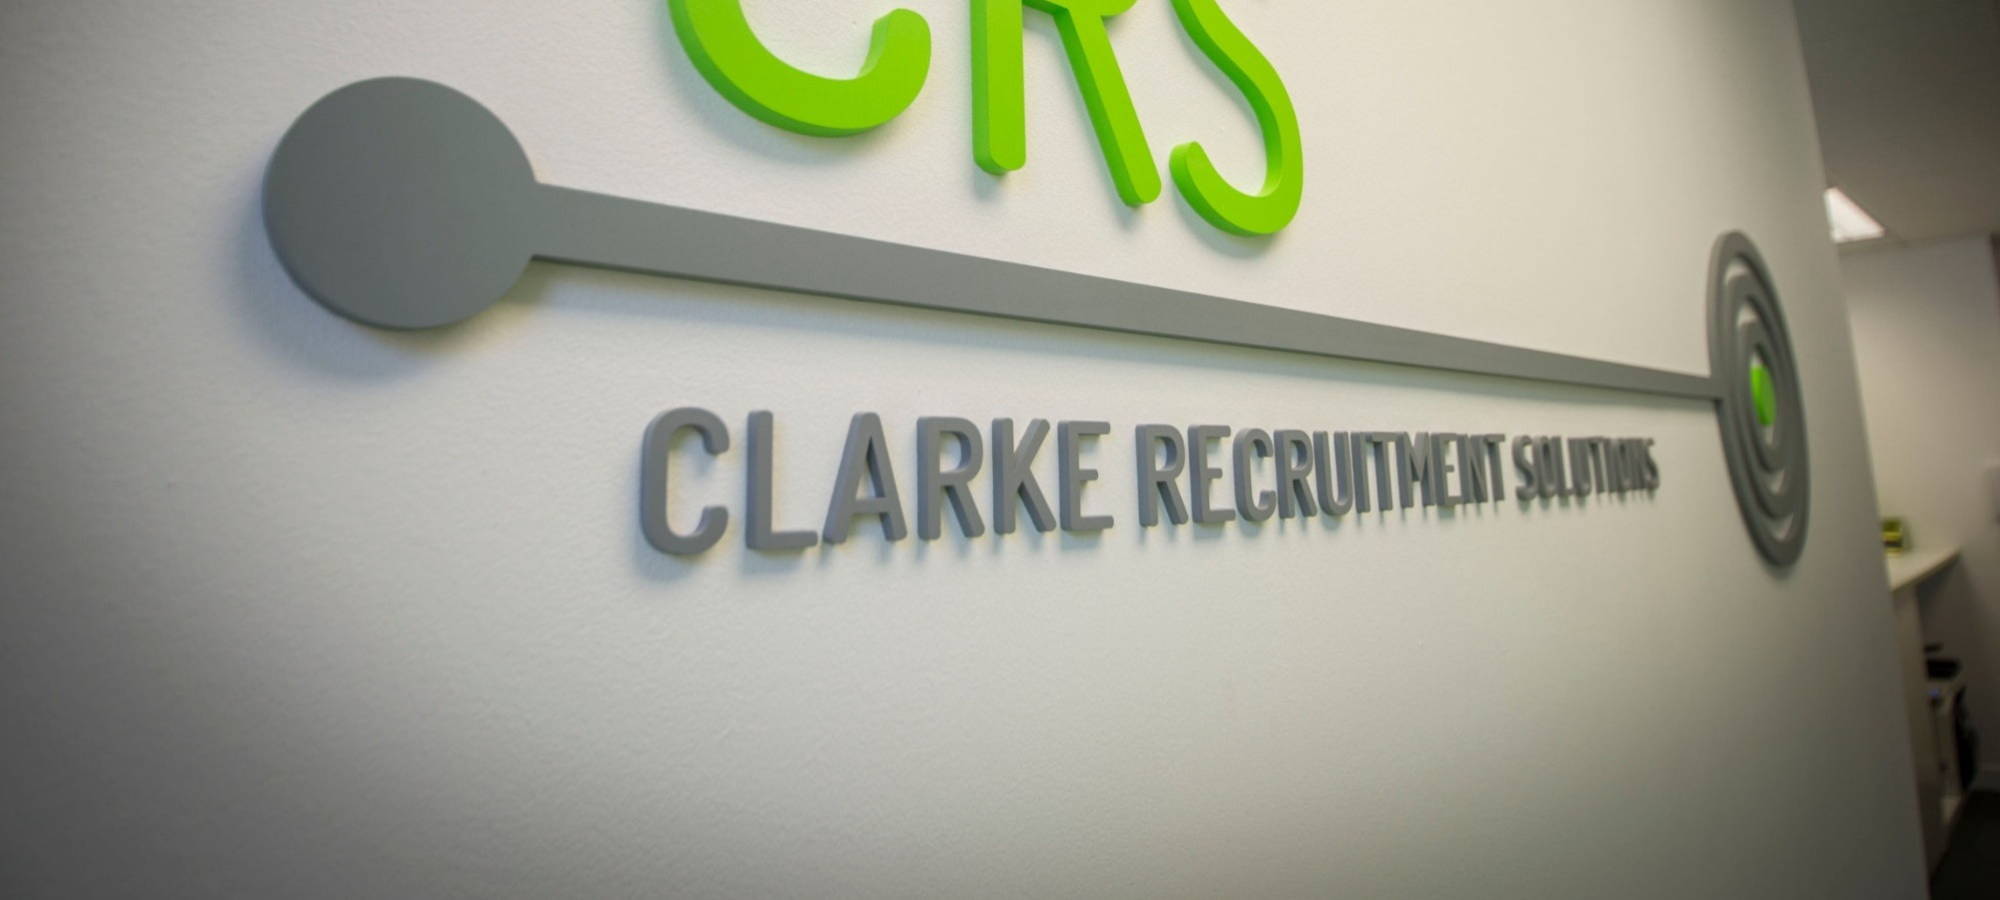 Clarke Recruitment logo placed on our office wall